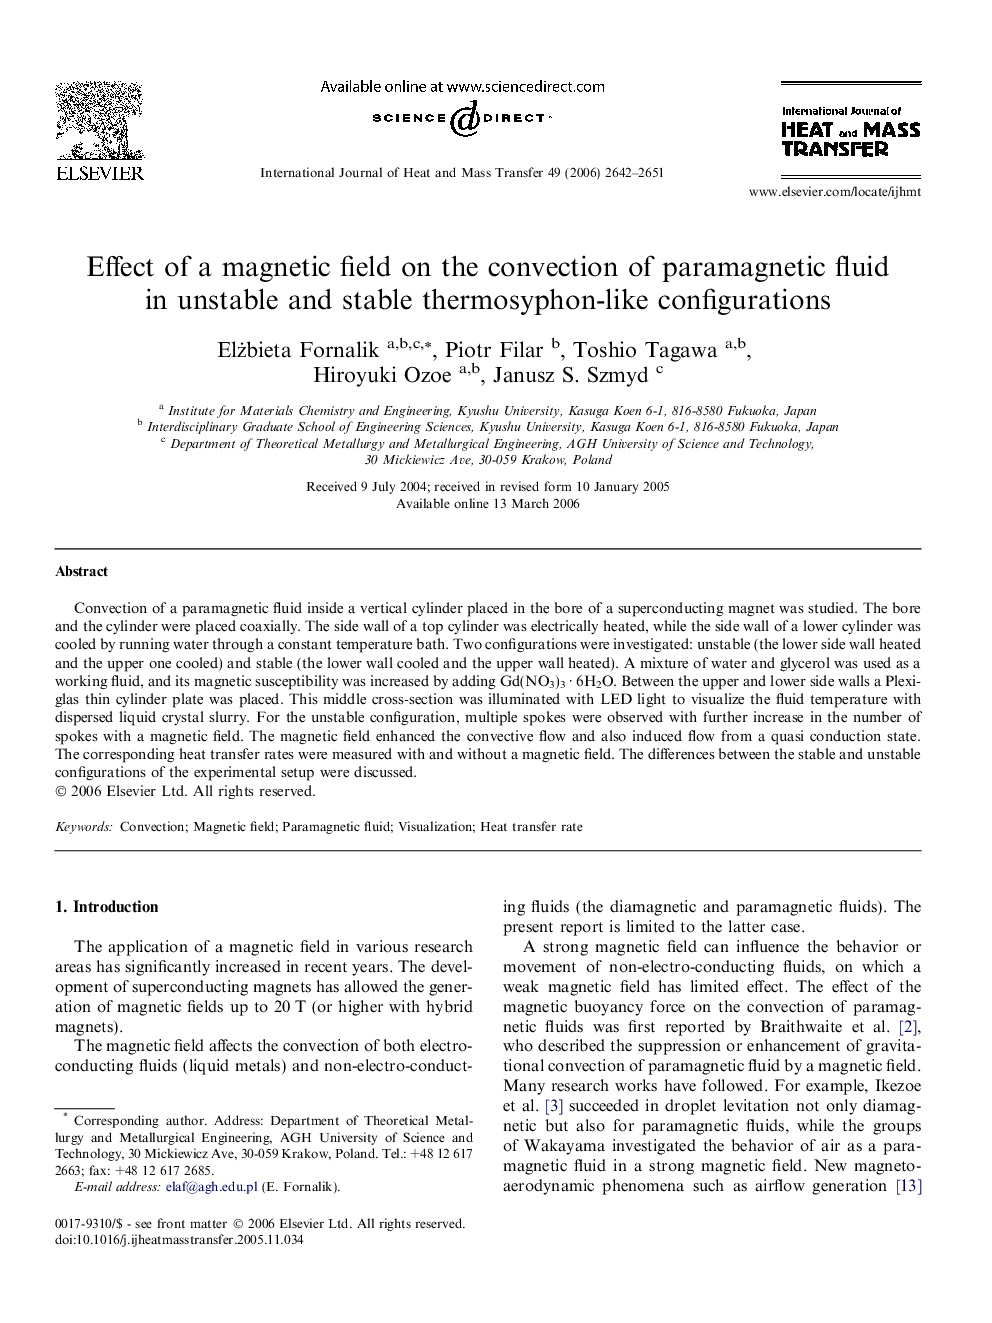 Effect of a magnetic field on the convection of paramagnetic fluid in unstable and stable thermosyphon-like configurations